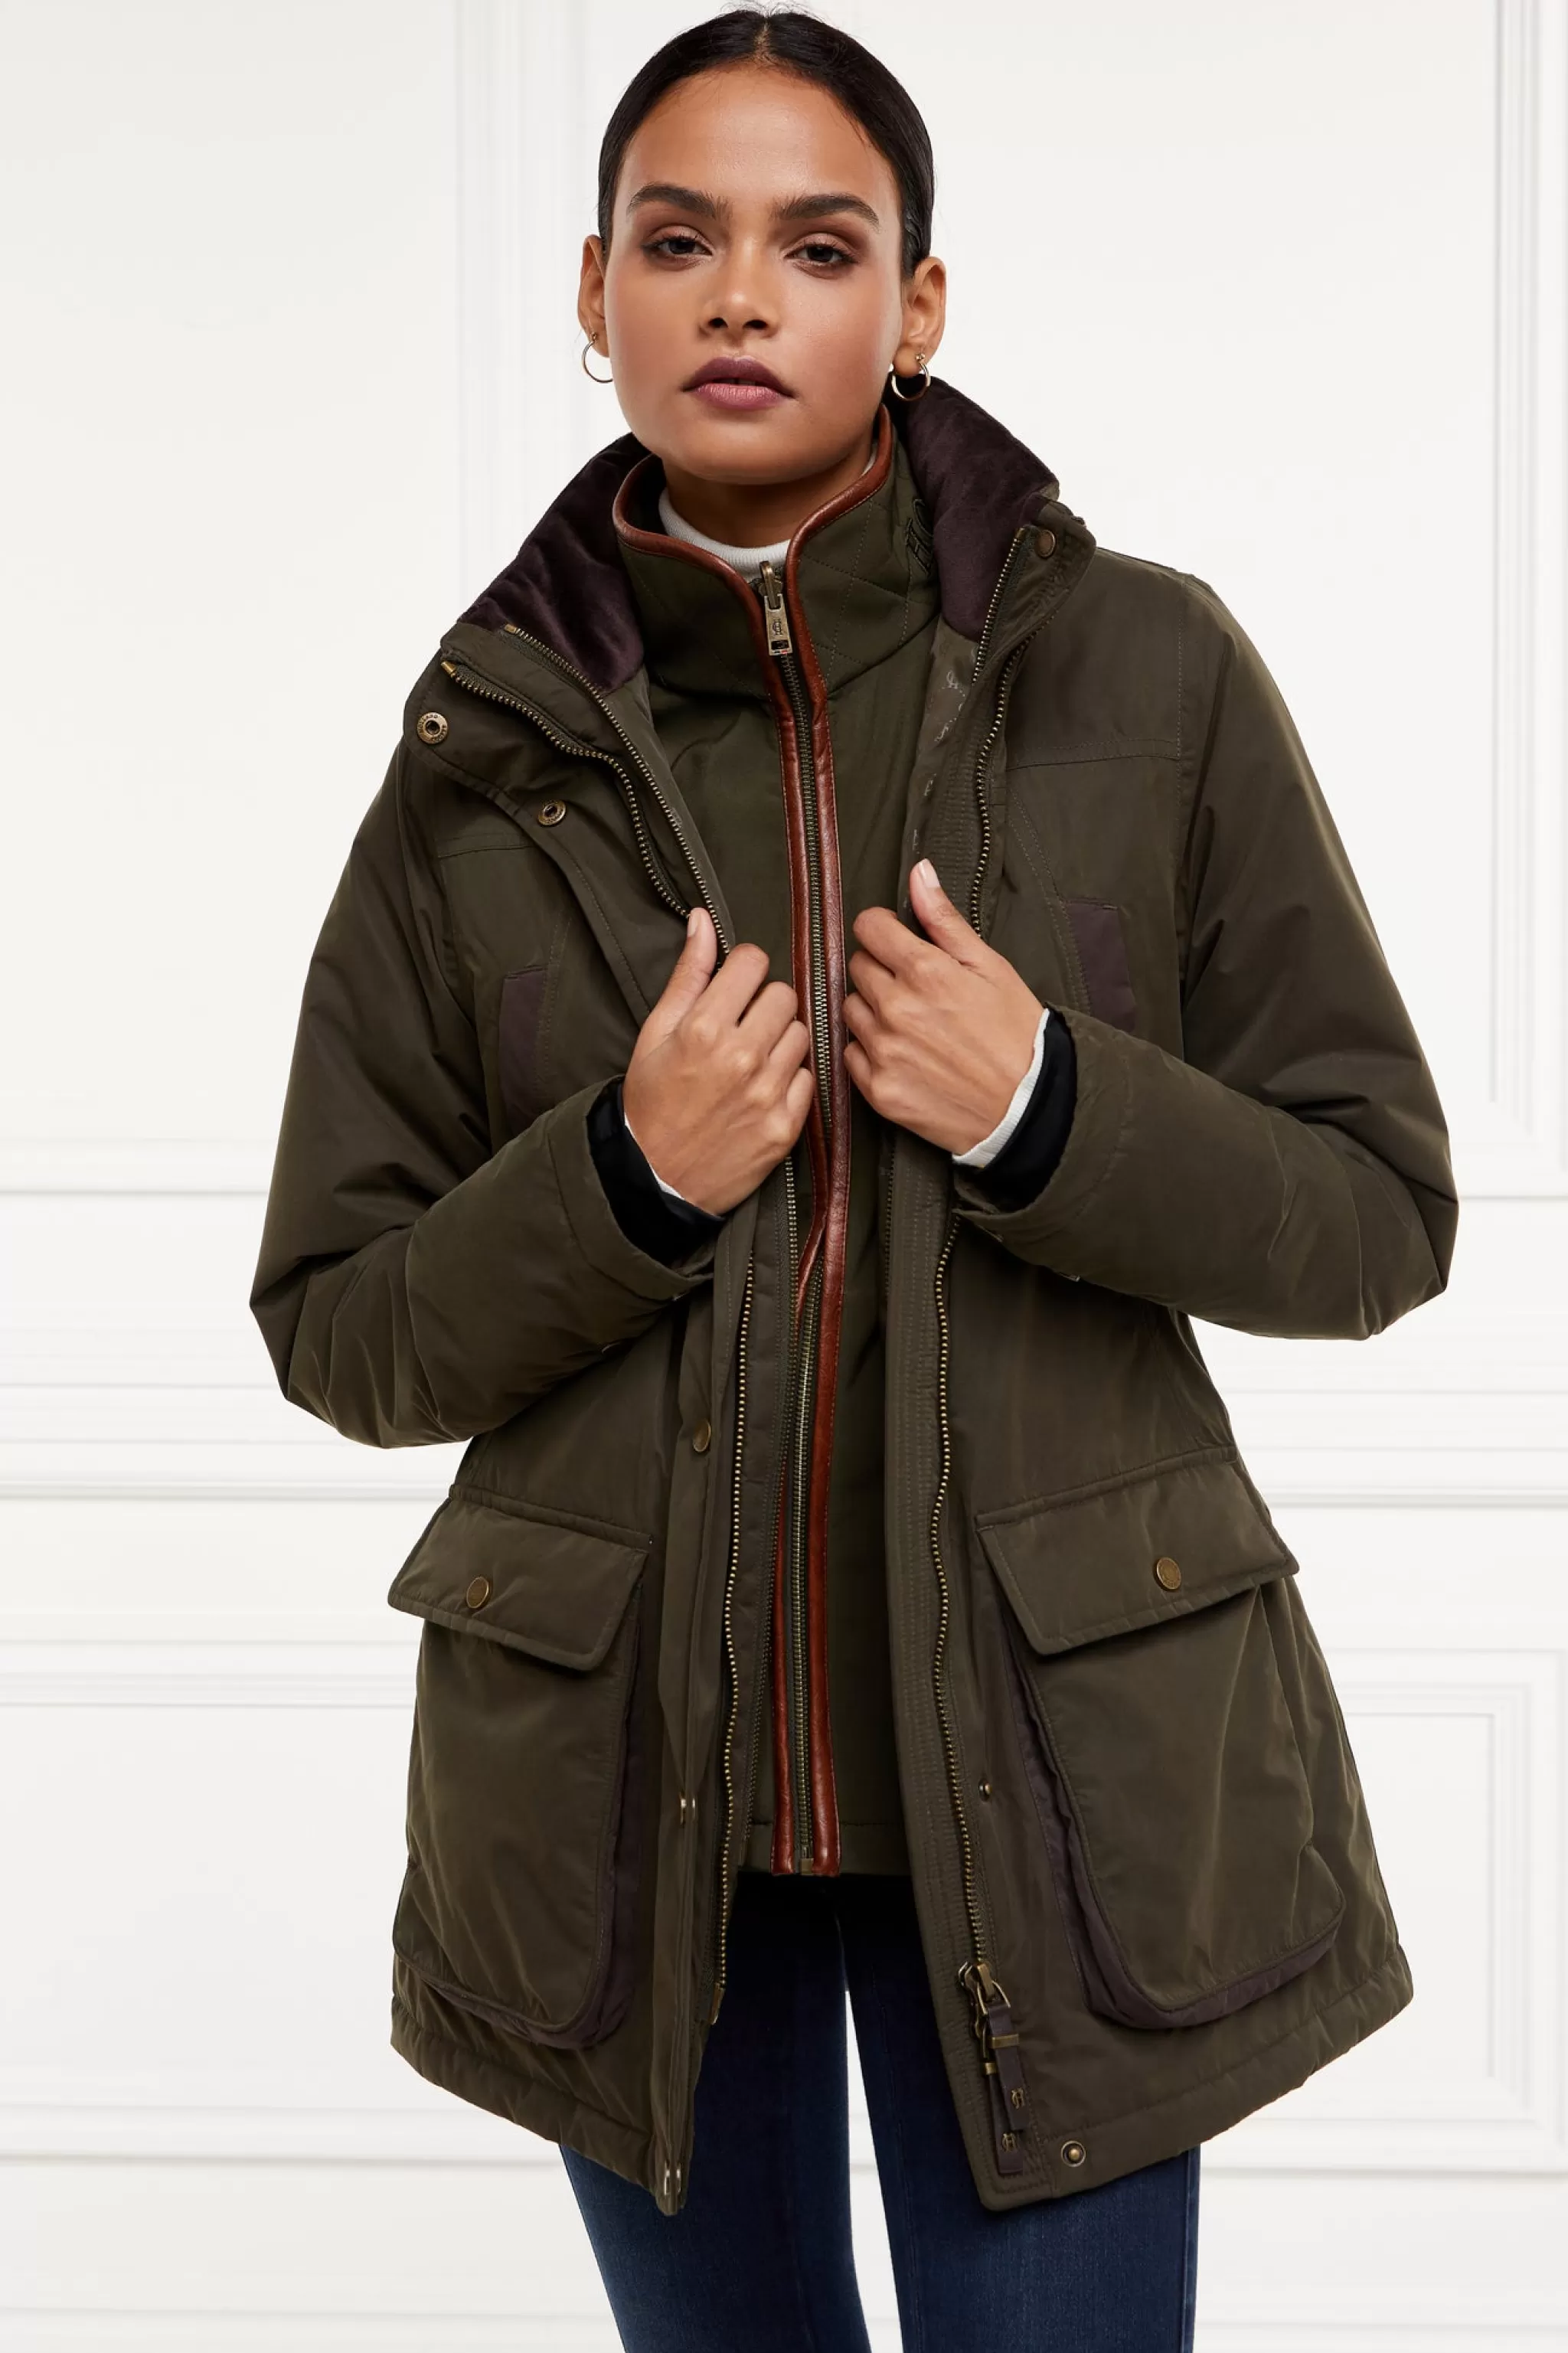 Stamford Country Coat>Holland Cooper Best Sale